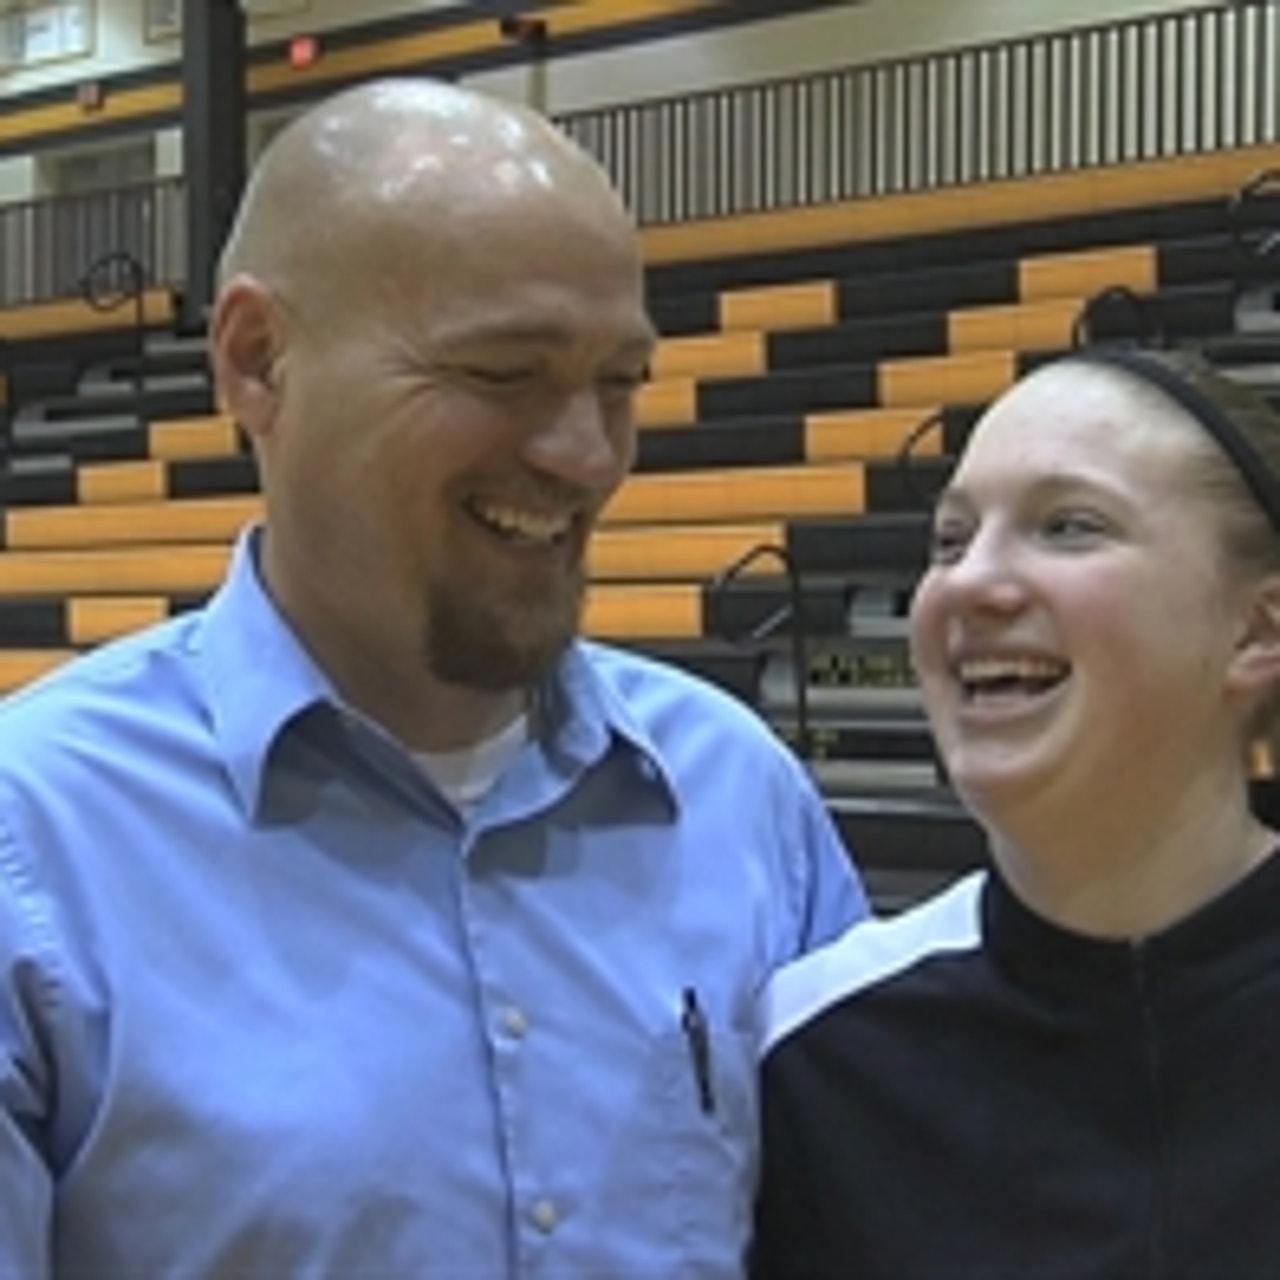 MHSAA feature: Like father, like daughter